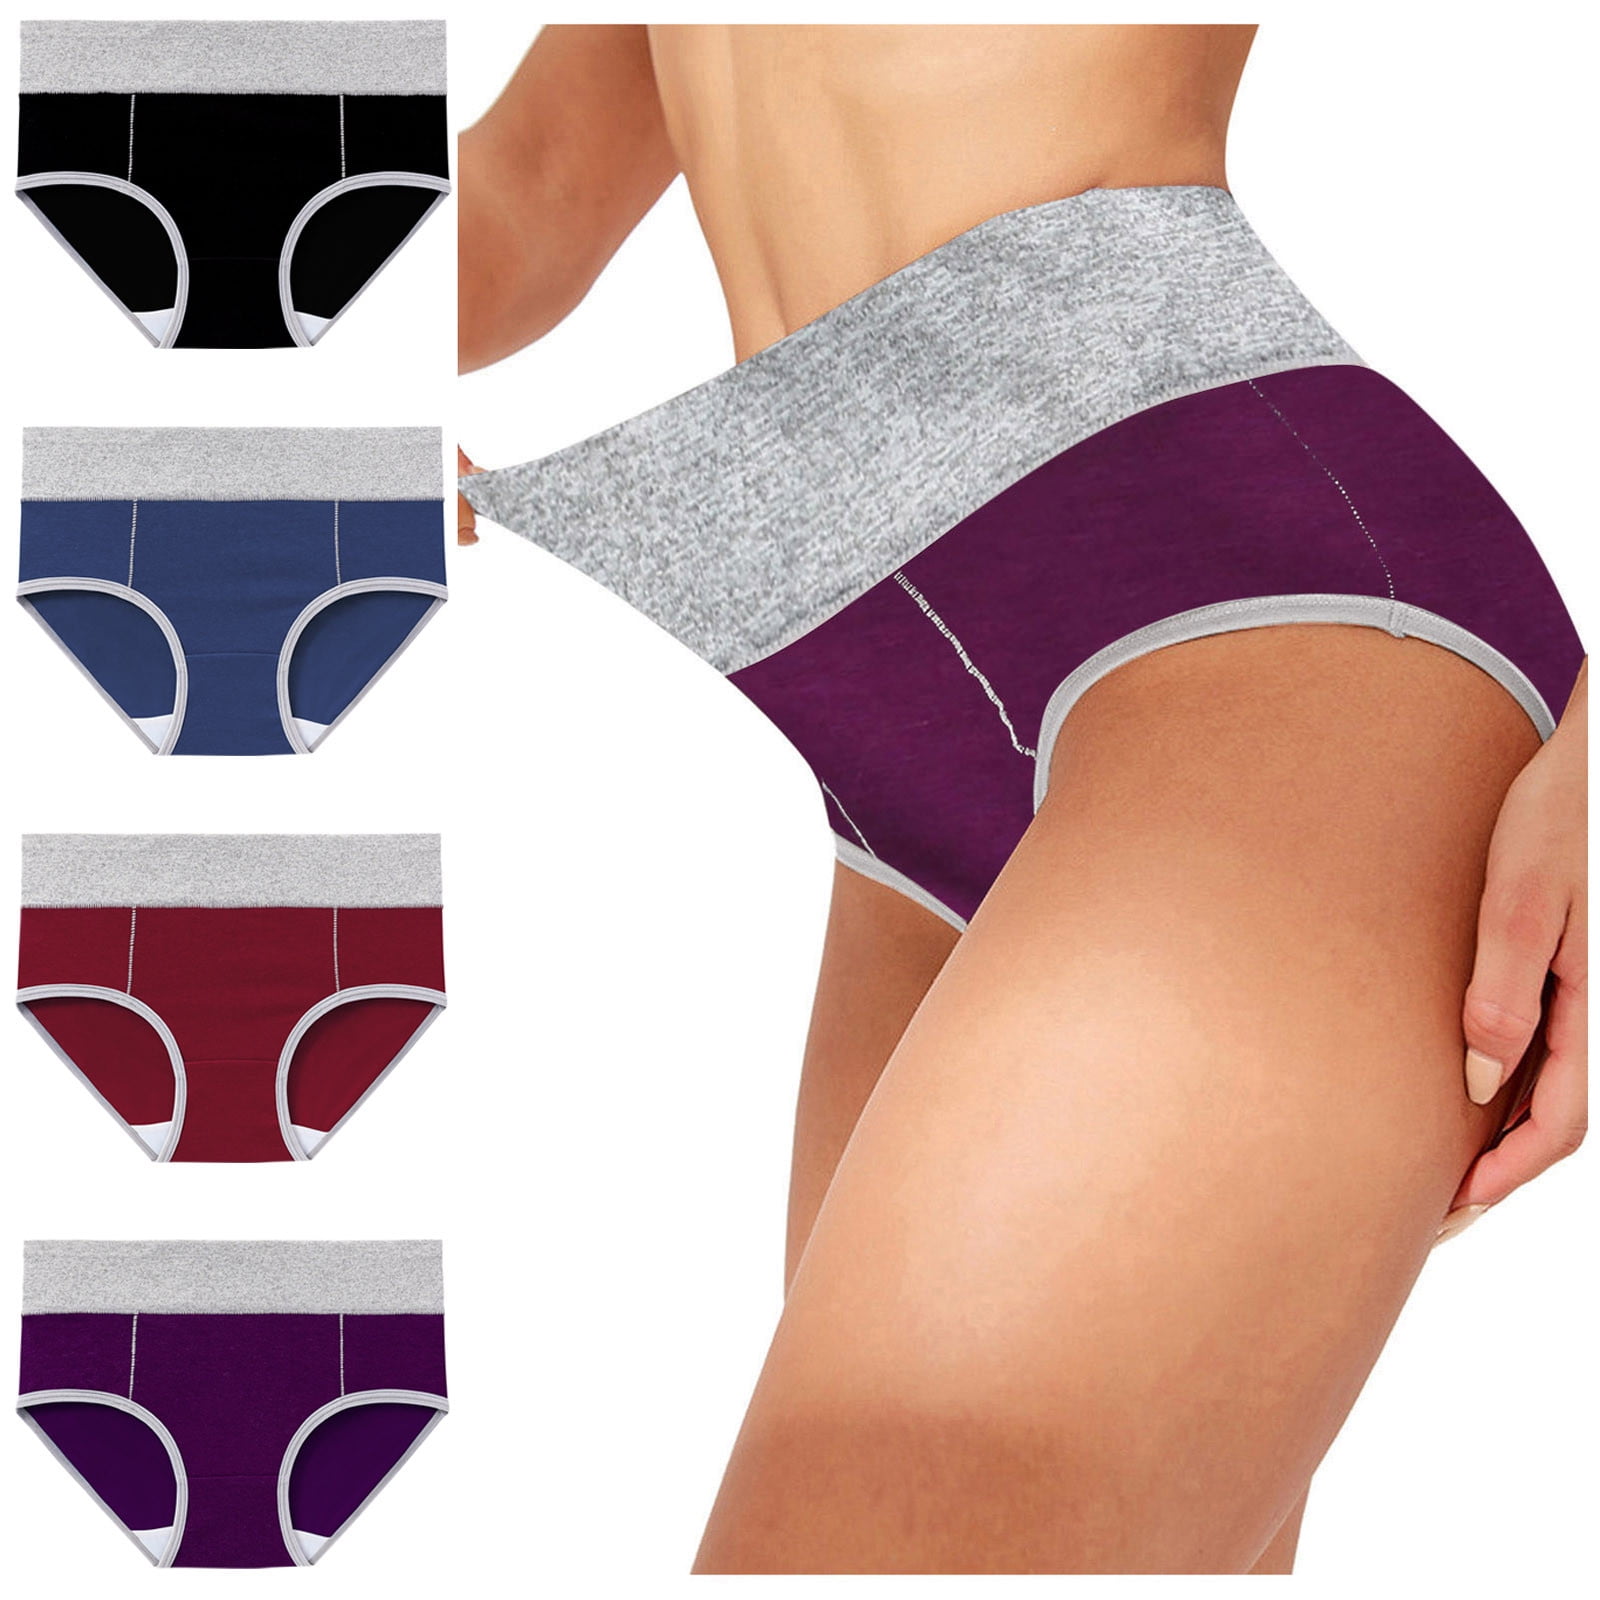 Scyoekwg Plus Size Womens High Waisted Underwear Cotton Stretchy Briefs  Ladies Soft Hipster Panties Multipack Pack of 4 Multicolor XL